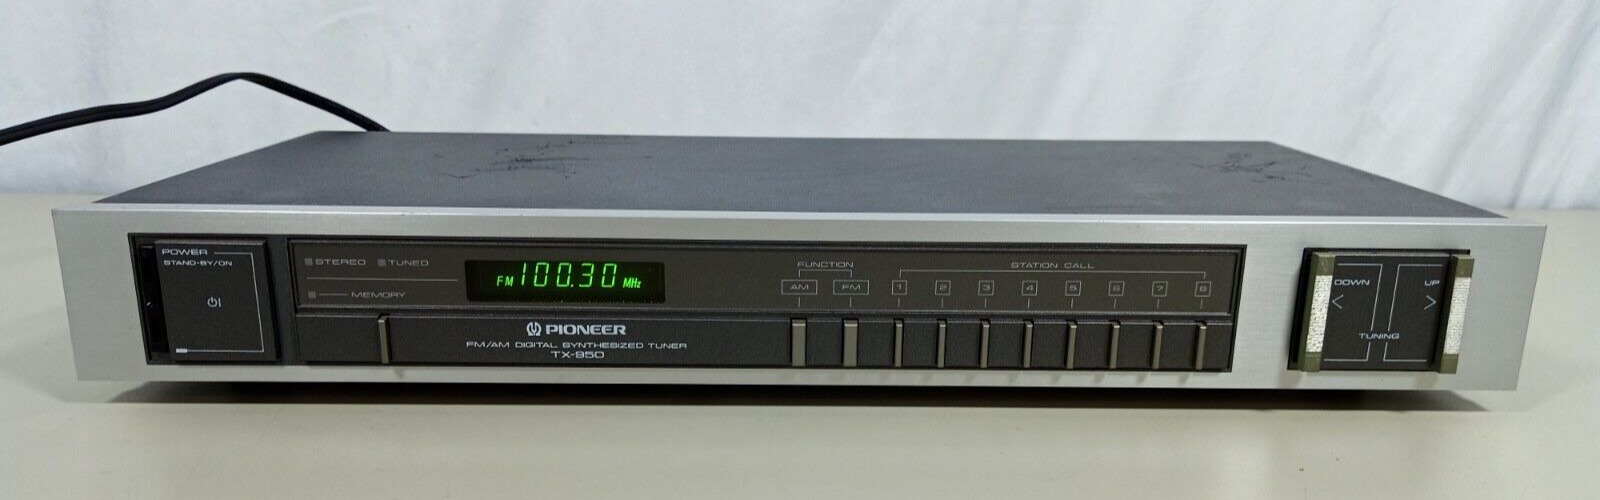 Vintage Pioneer TX-950 AM FM Digital Synthesized Audio Tuner - Tested & Working